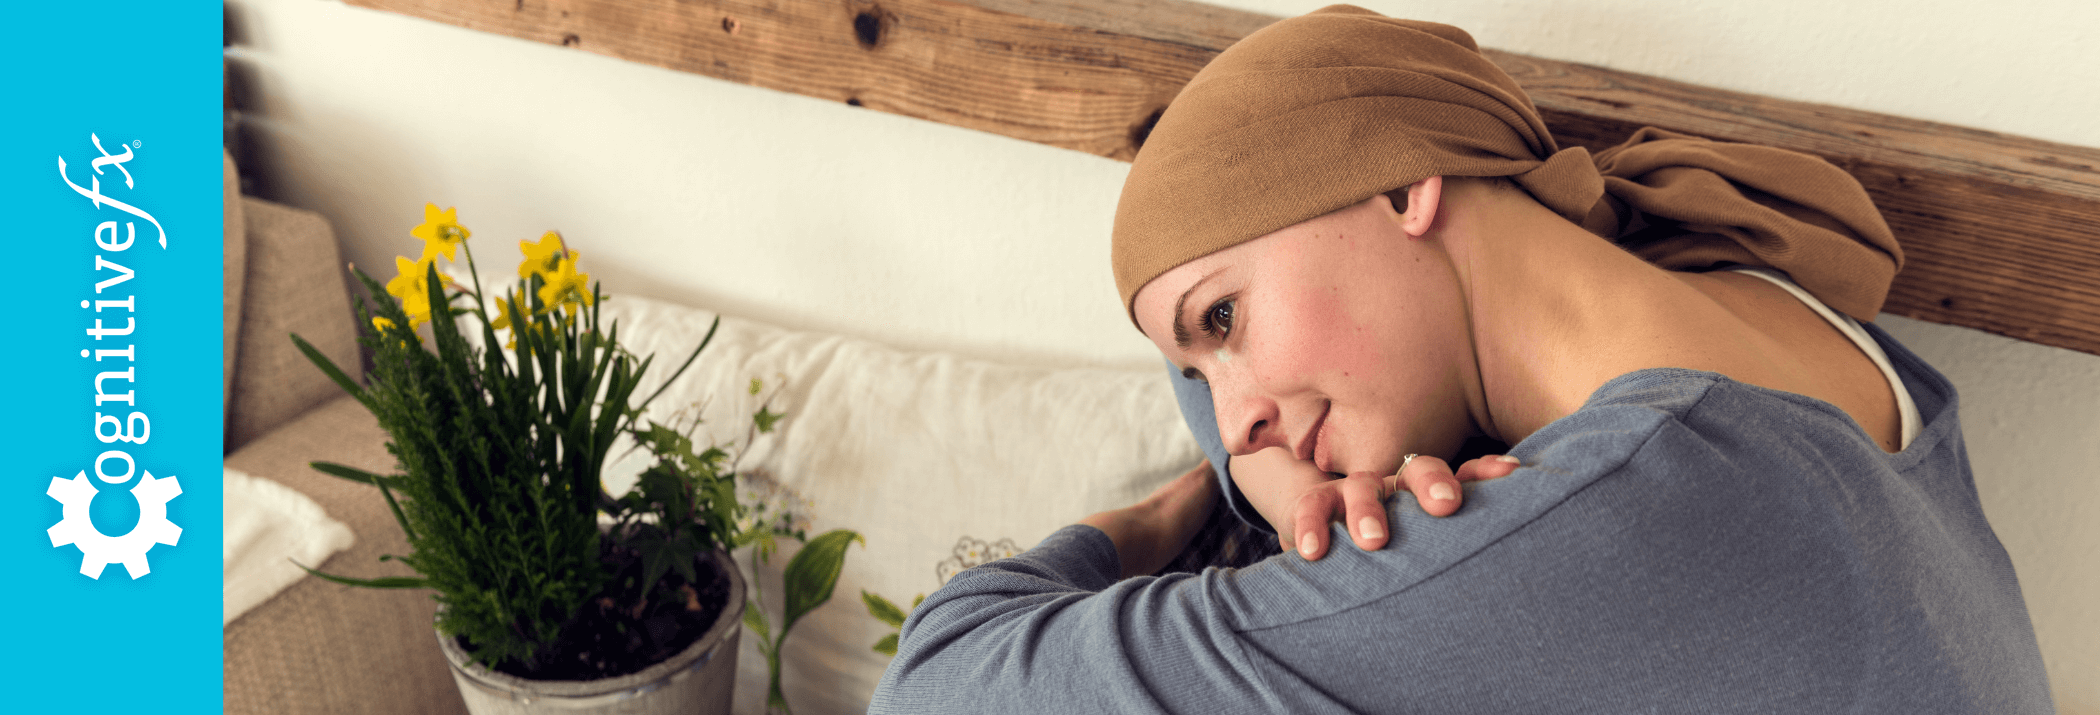 How to Reverse Chemo Brain: Treatment for Cognitive Symptoms after Cancer